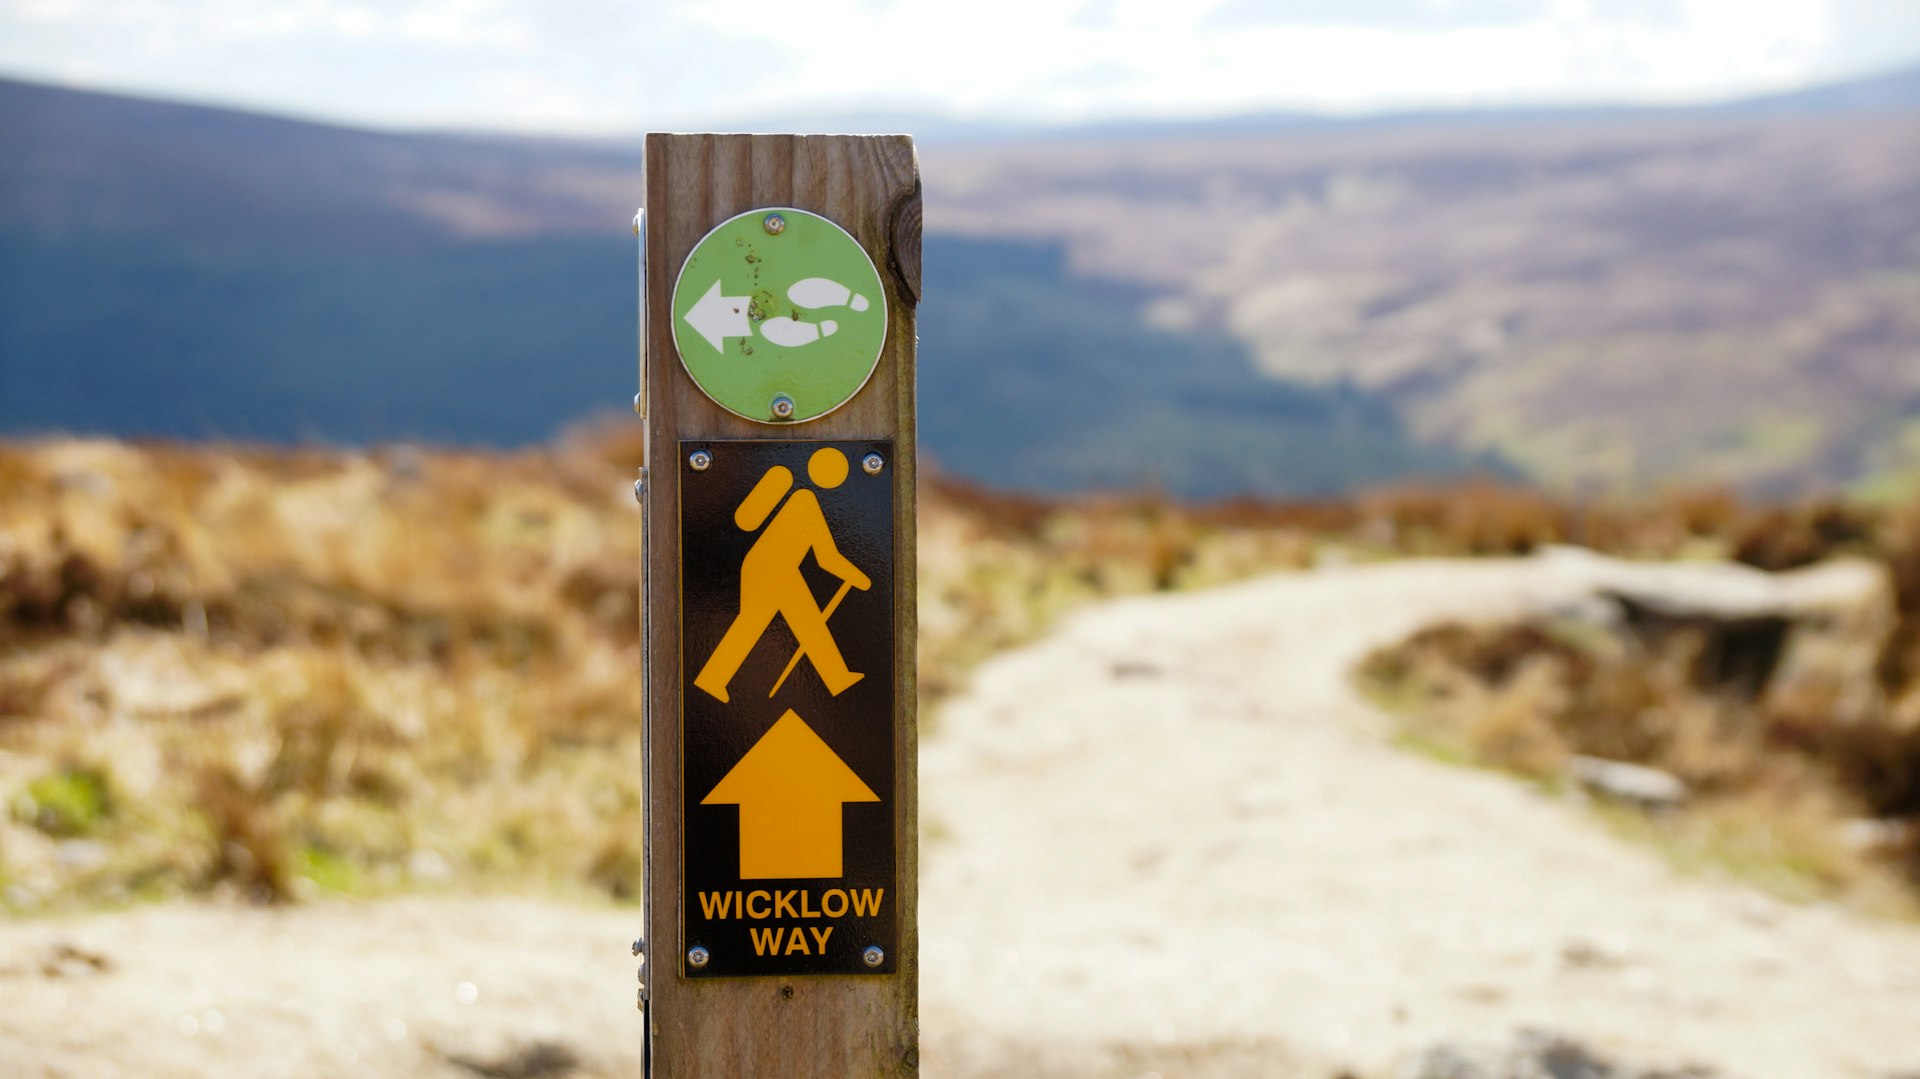 A sign labeled "Wicklow Way" indicates which direction hikers should go on the long-distance trail